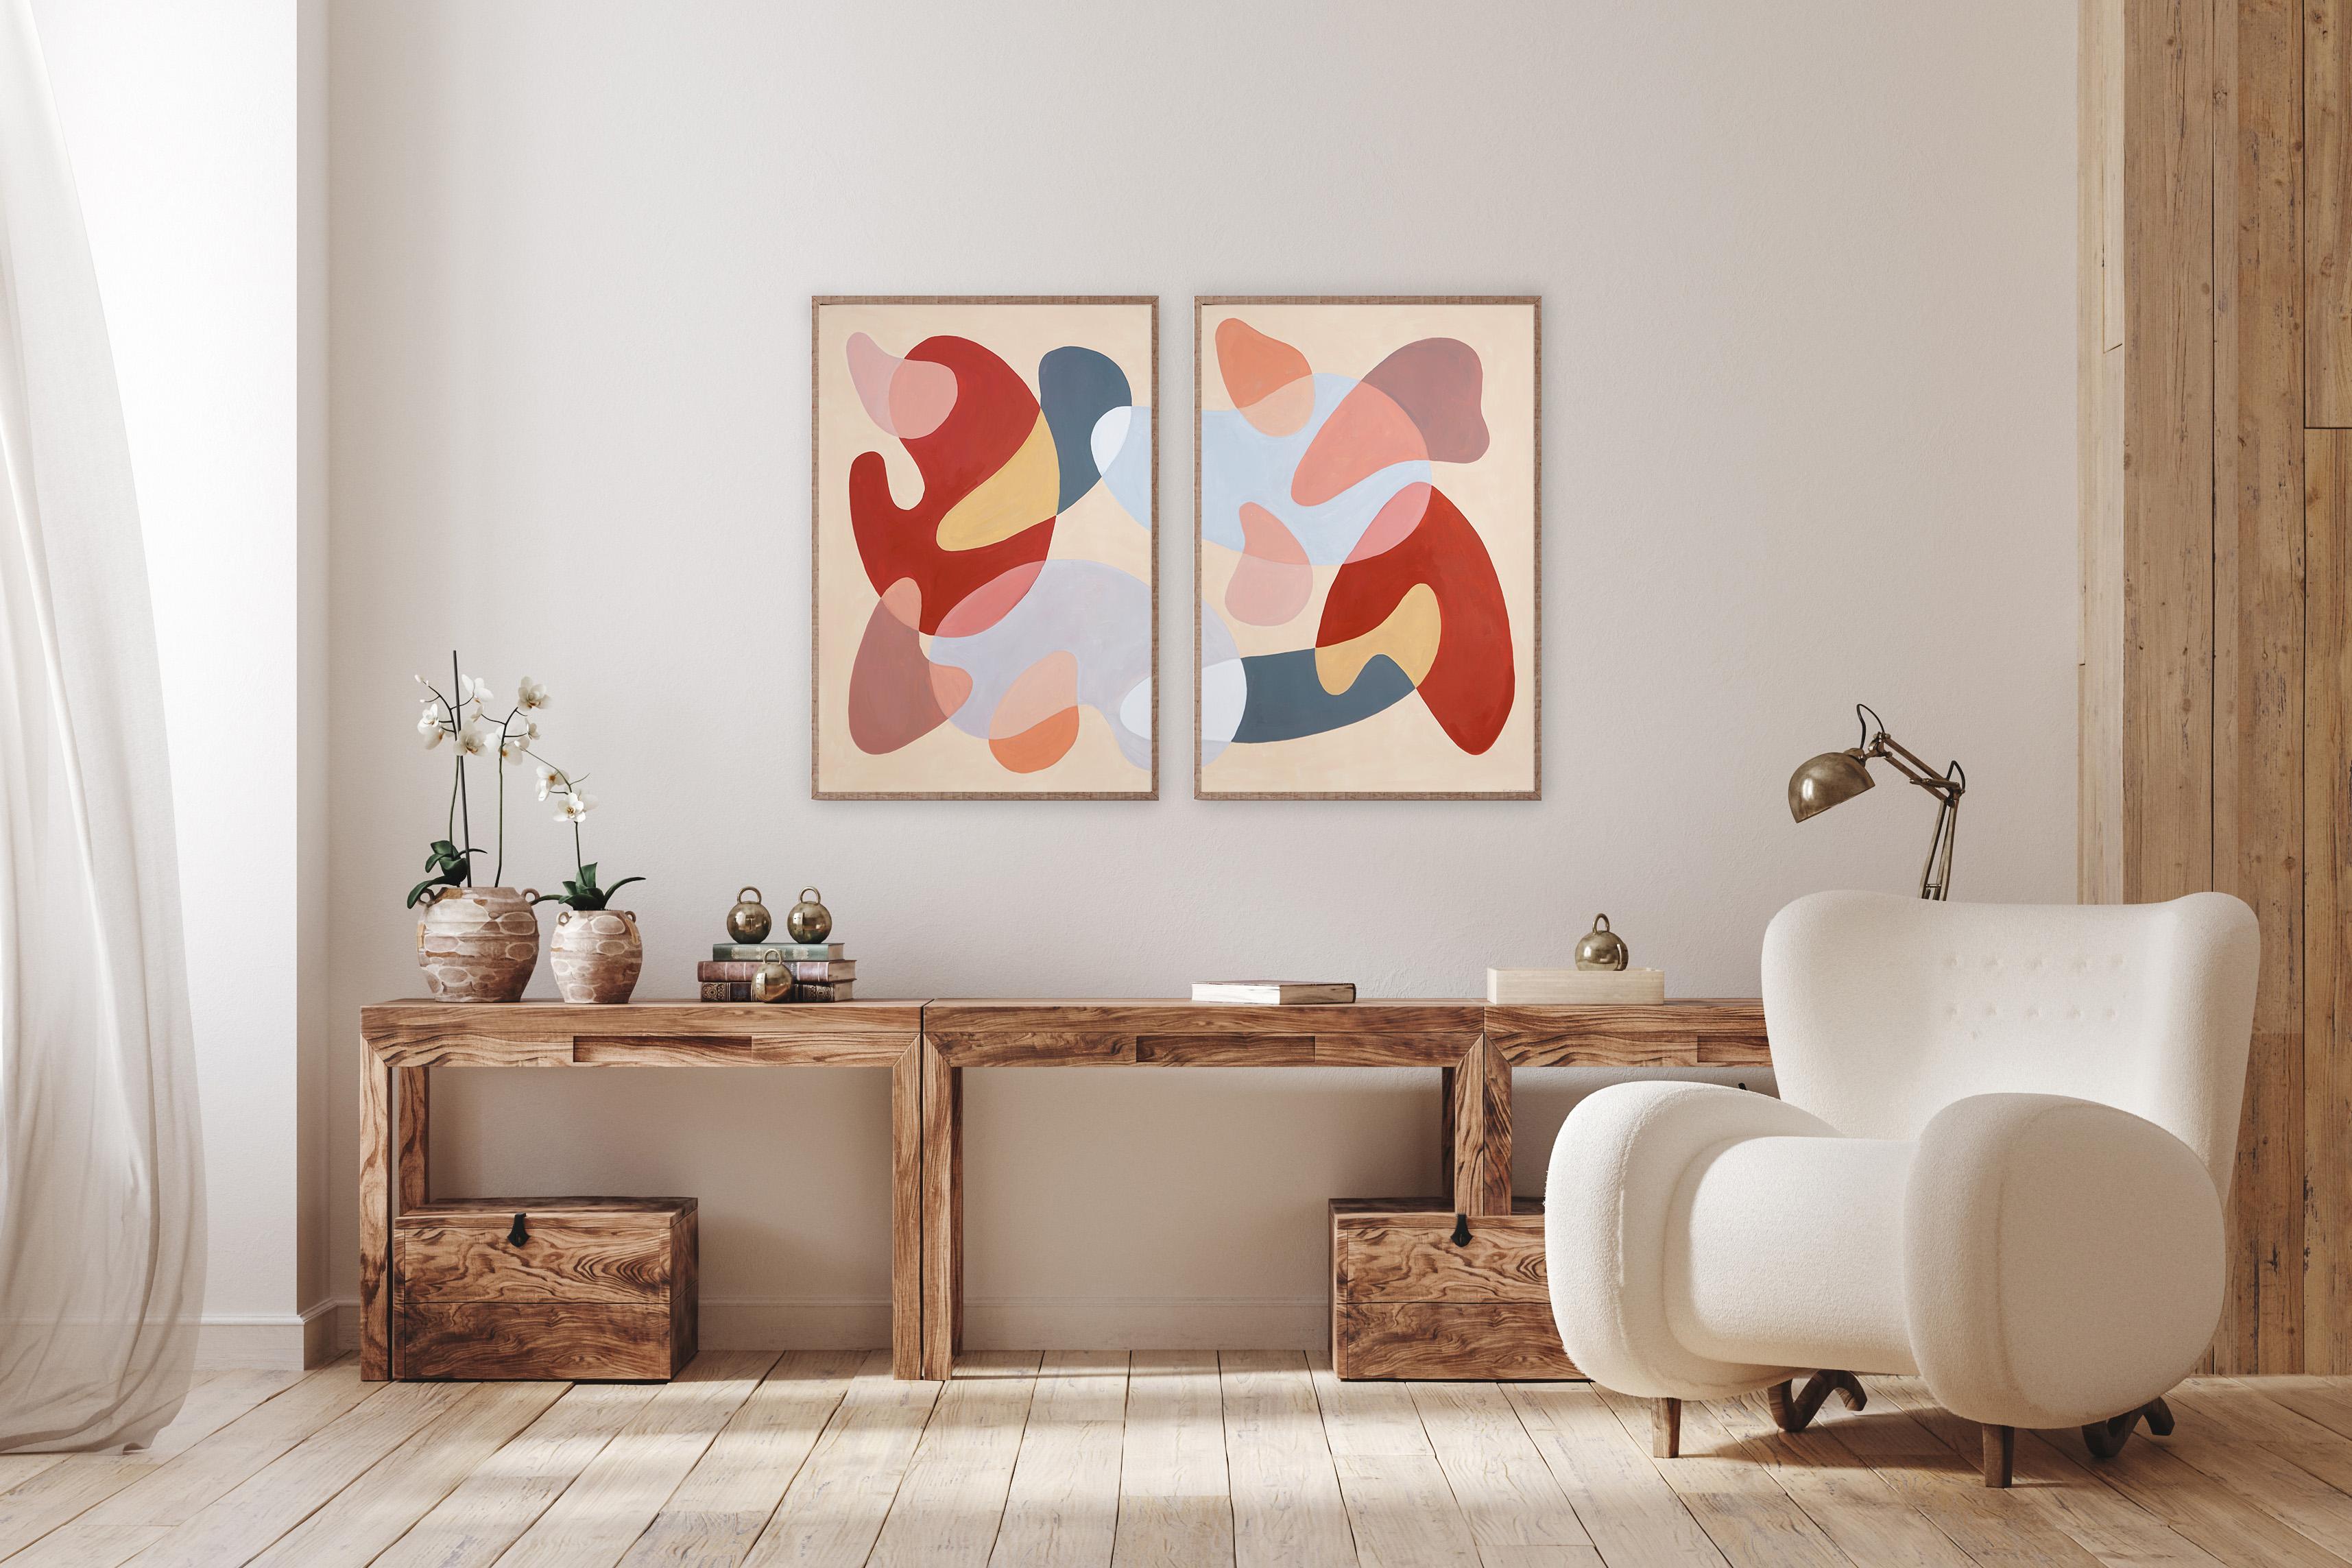 Fifties Grand Canyon, Mid-Century Shapes Diptych, Abstract Landscape, Red, Blue For Sale 4